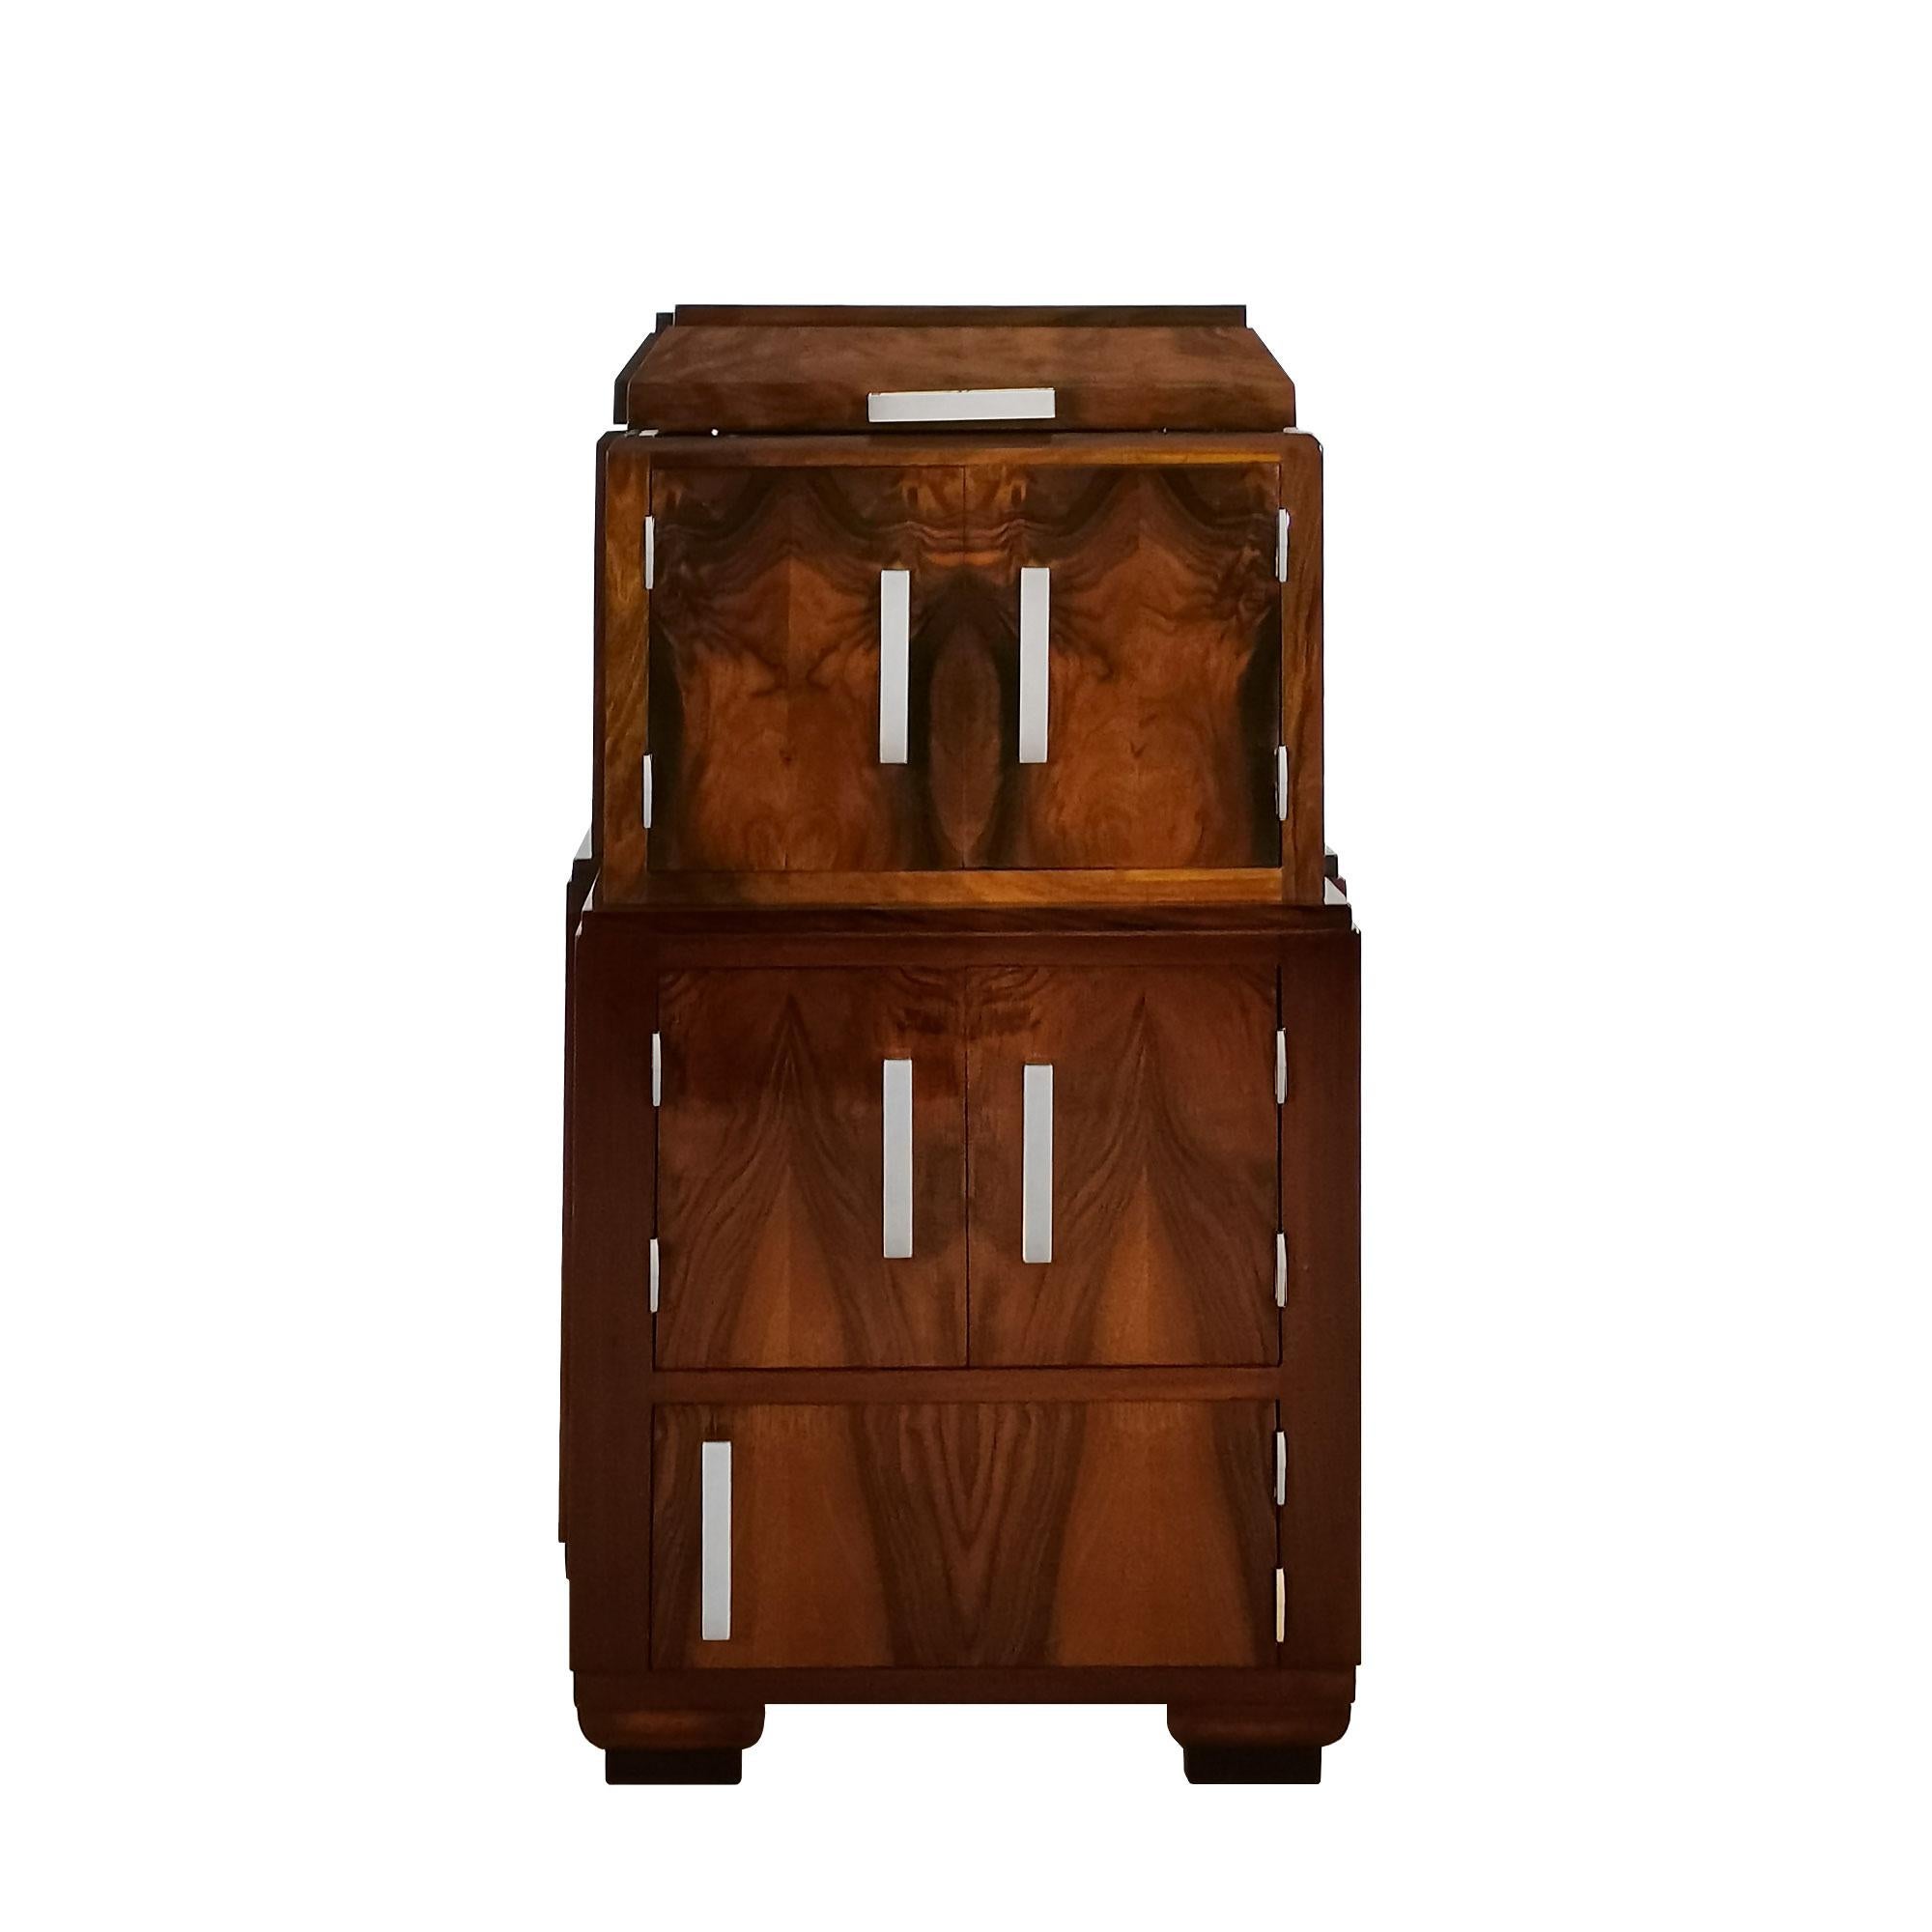 Art Deco radio cabinet converted into a dry bar or auxiliary cabinet, solid walnut and walnut veneer. Interior of the flap door decorated with marquetry. Three storage spaces in the front and two small niches on each side. French polish. Nickel